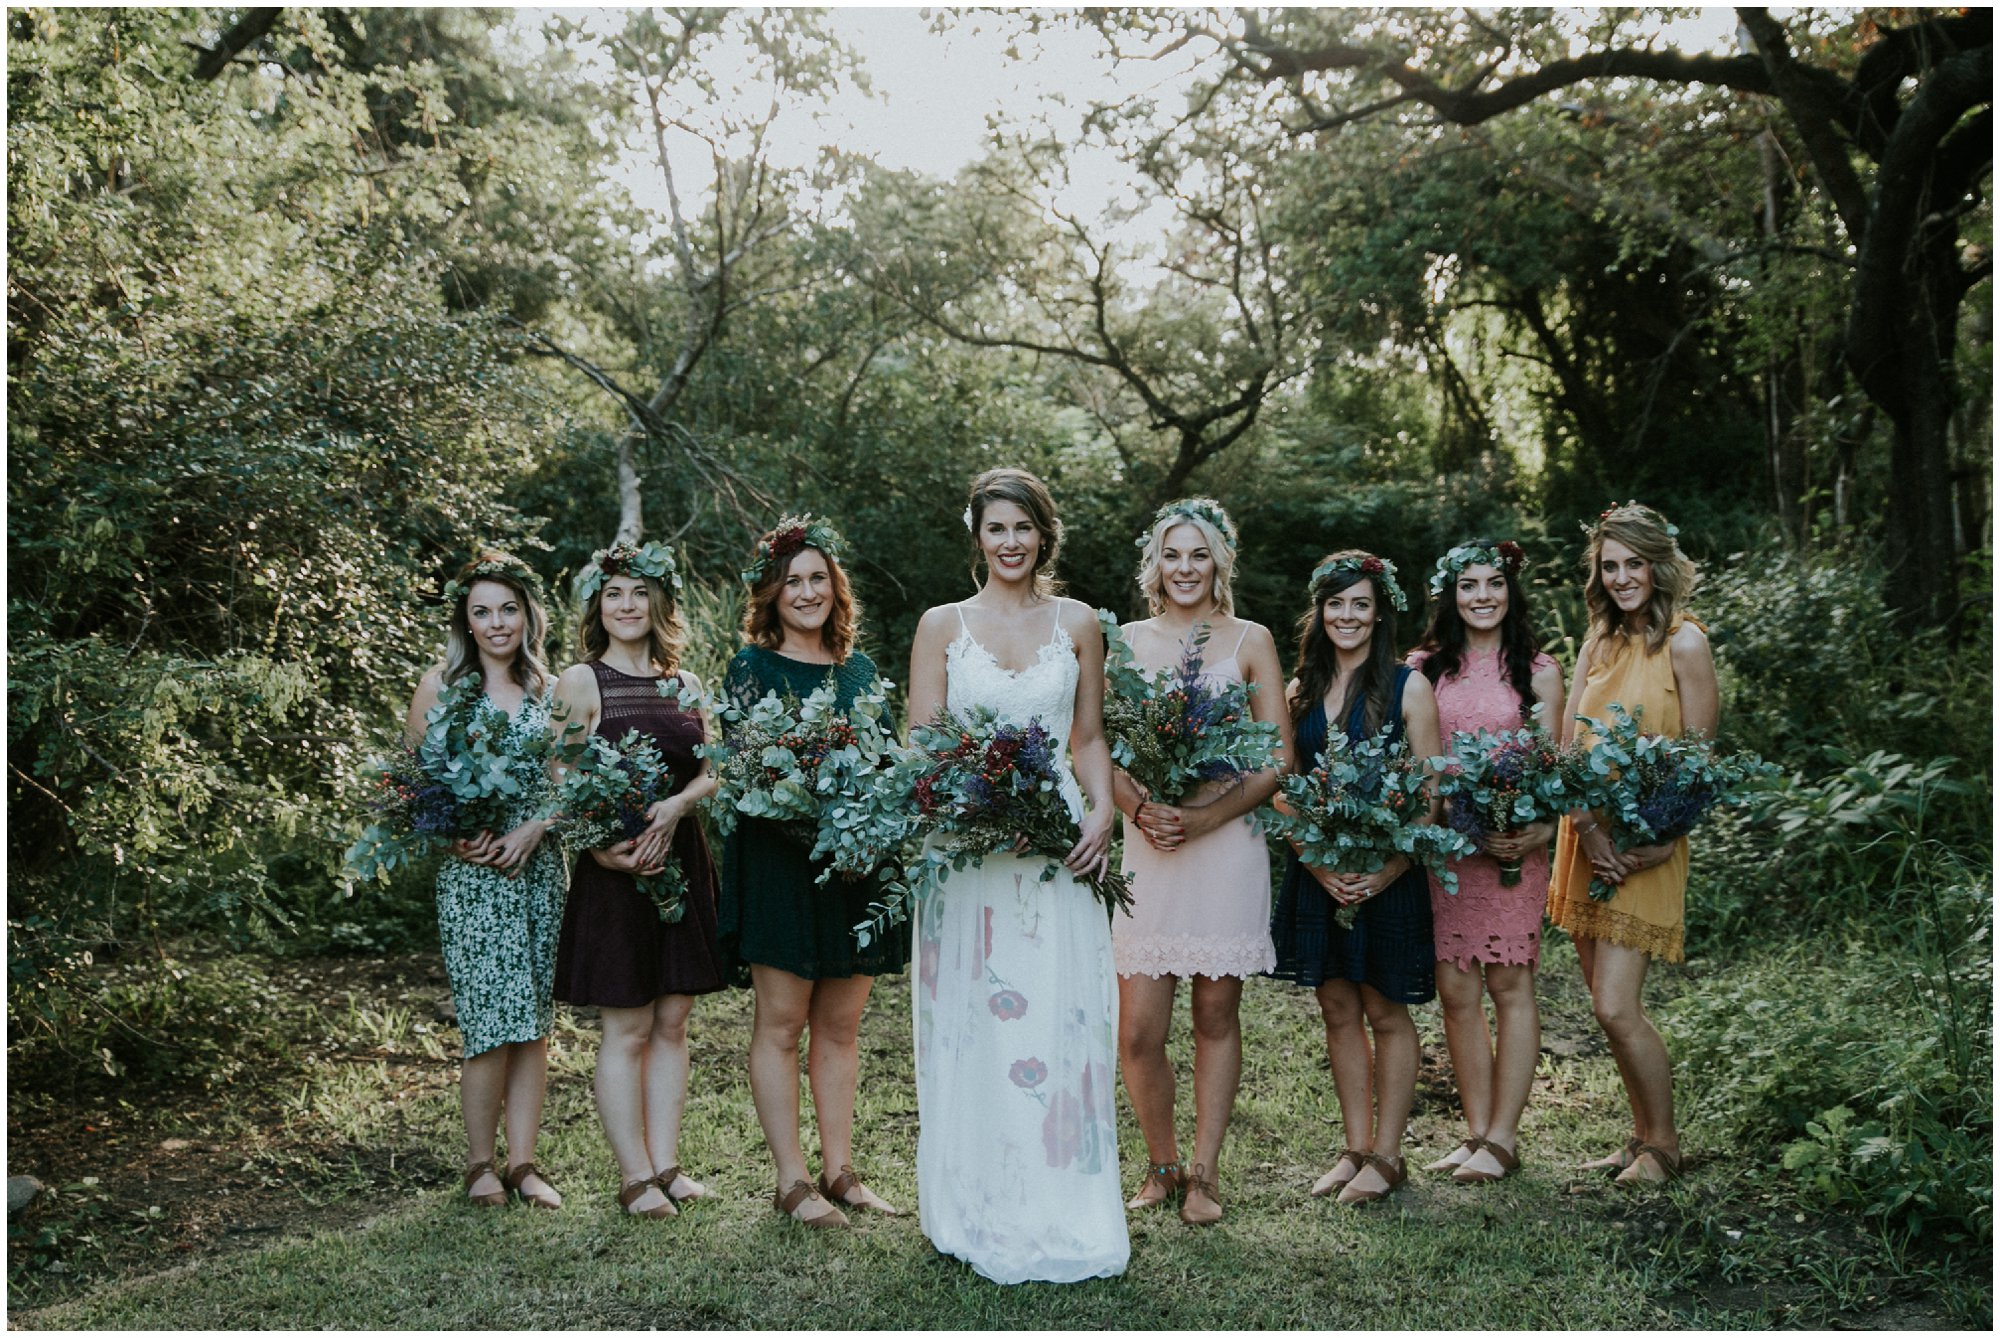 Bride and Bridesmaids at an Outdoor Bohemian Destination Wedding at Francine’s Venue in Hoedspruit Limpopo by Junebug World's Best Photographer Maryke Albertyn Award Winning International Alternative Moody Photography based in Cape Town South Africa